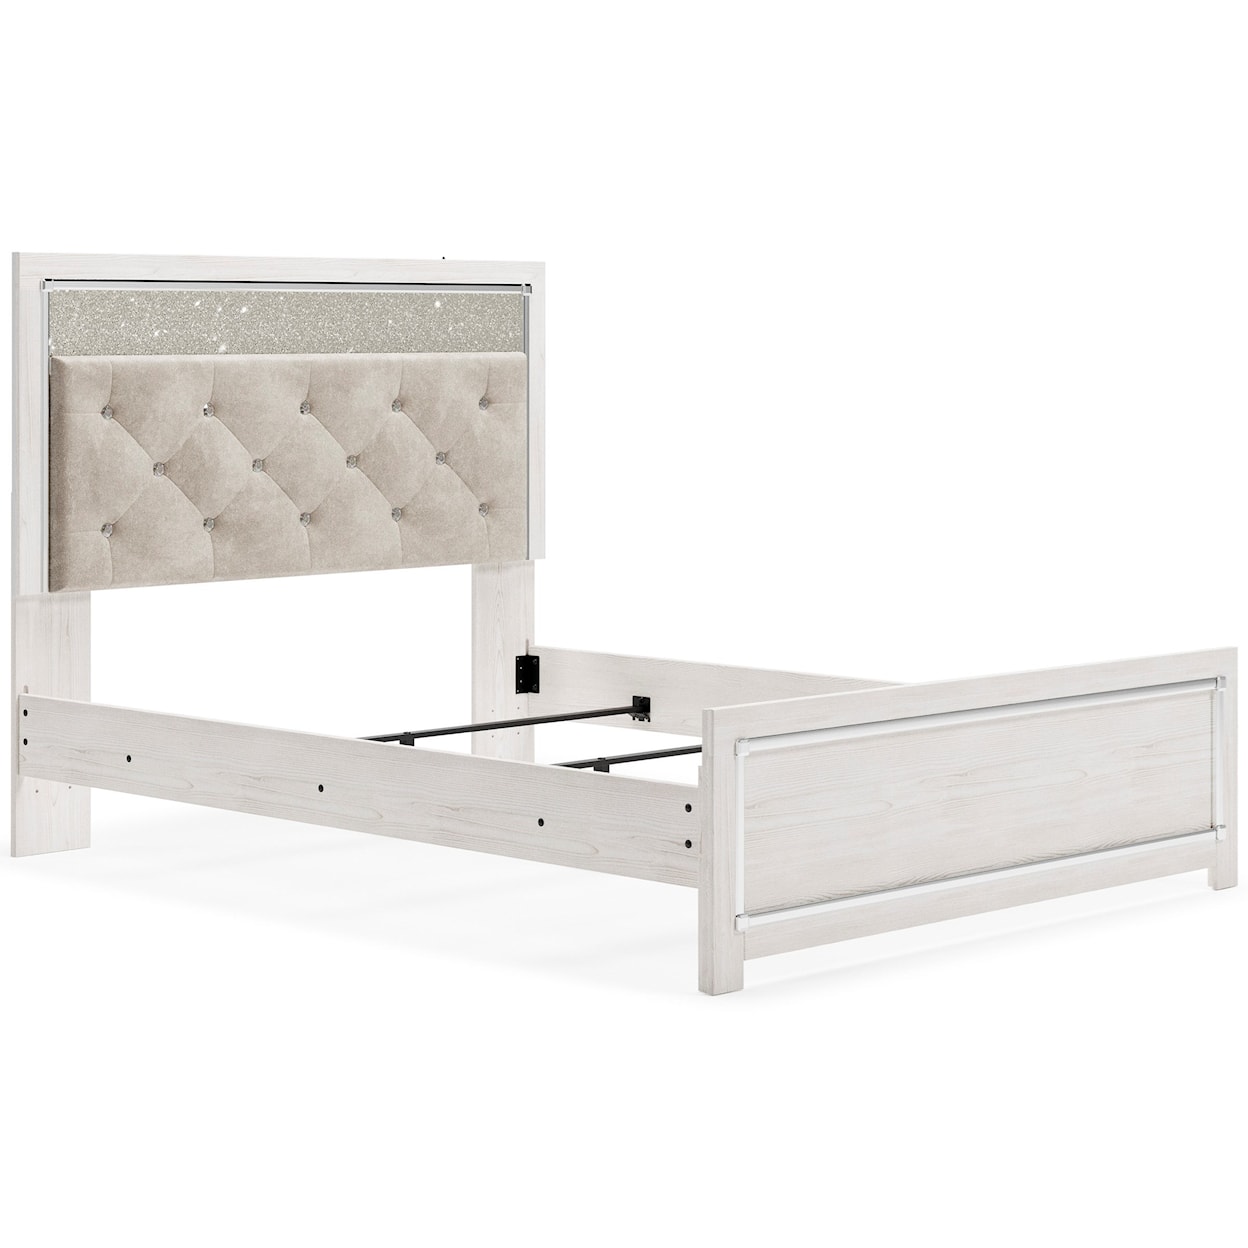 Signature Design by Ashley Altyra Queen Upholstered Panel Bed